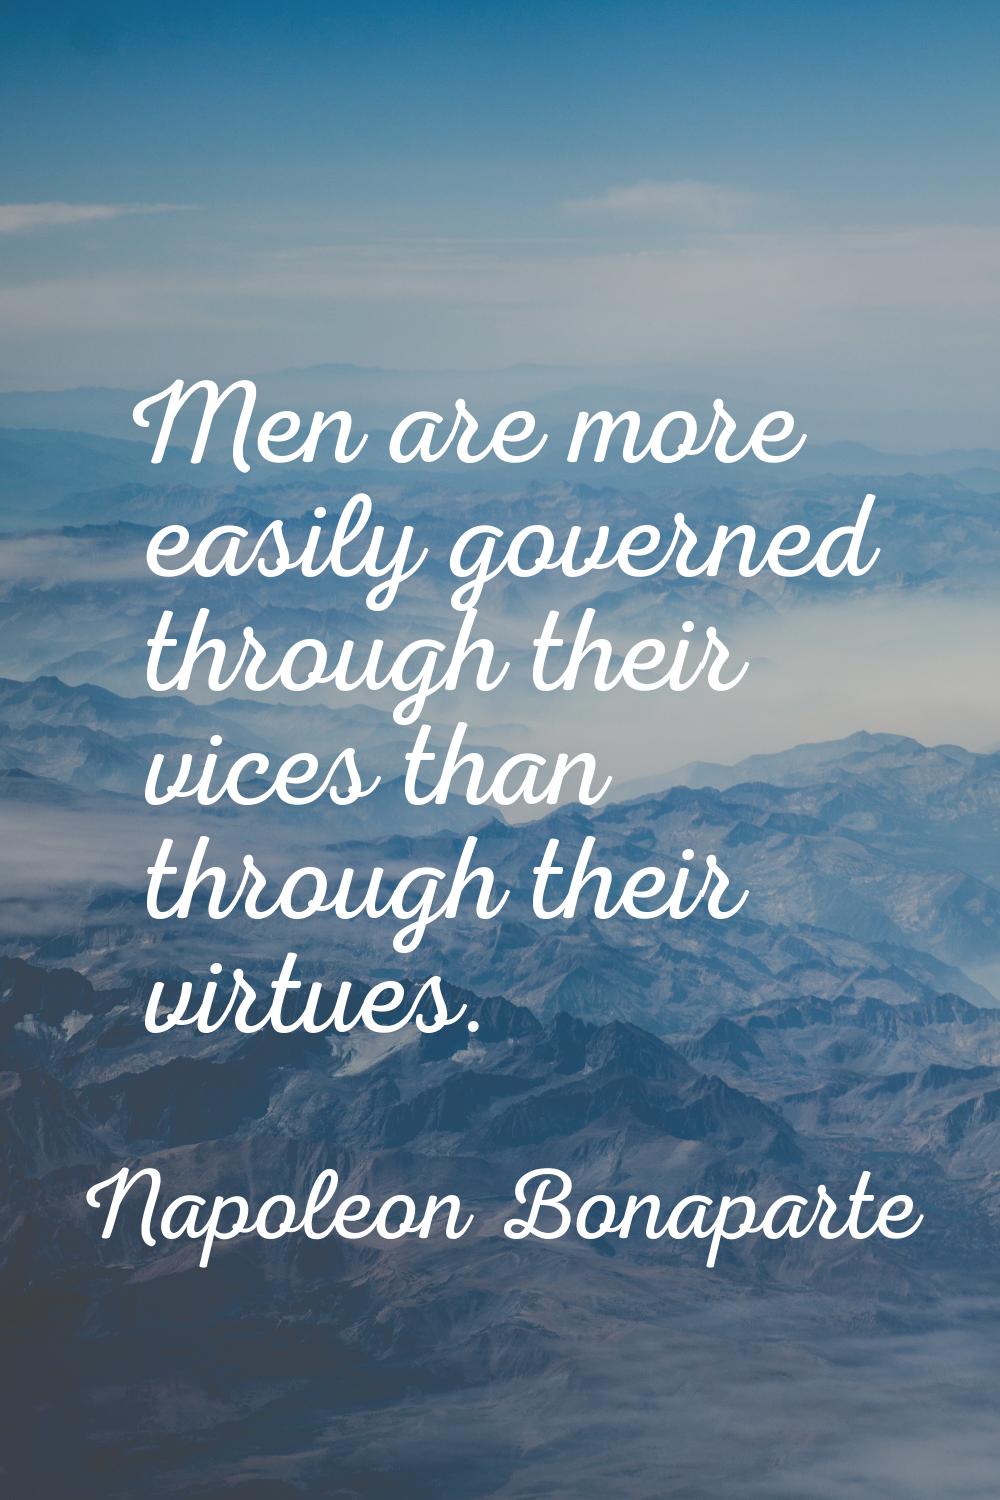 Men are more easily governed through their vices than through their virtues.